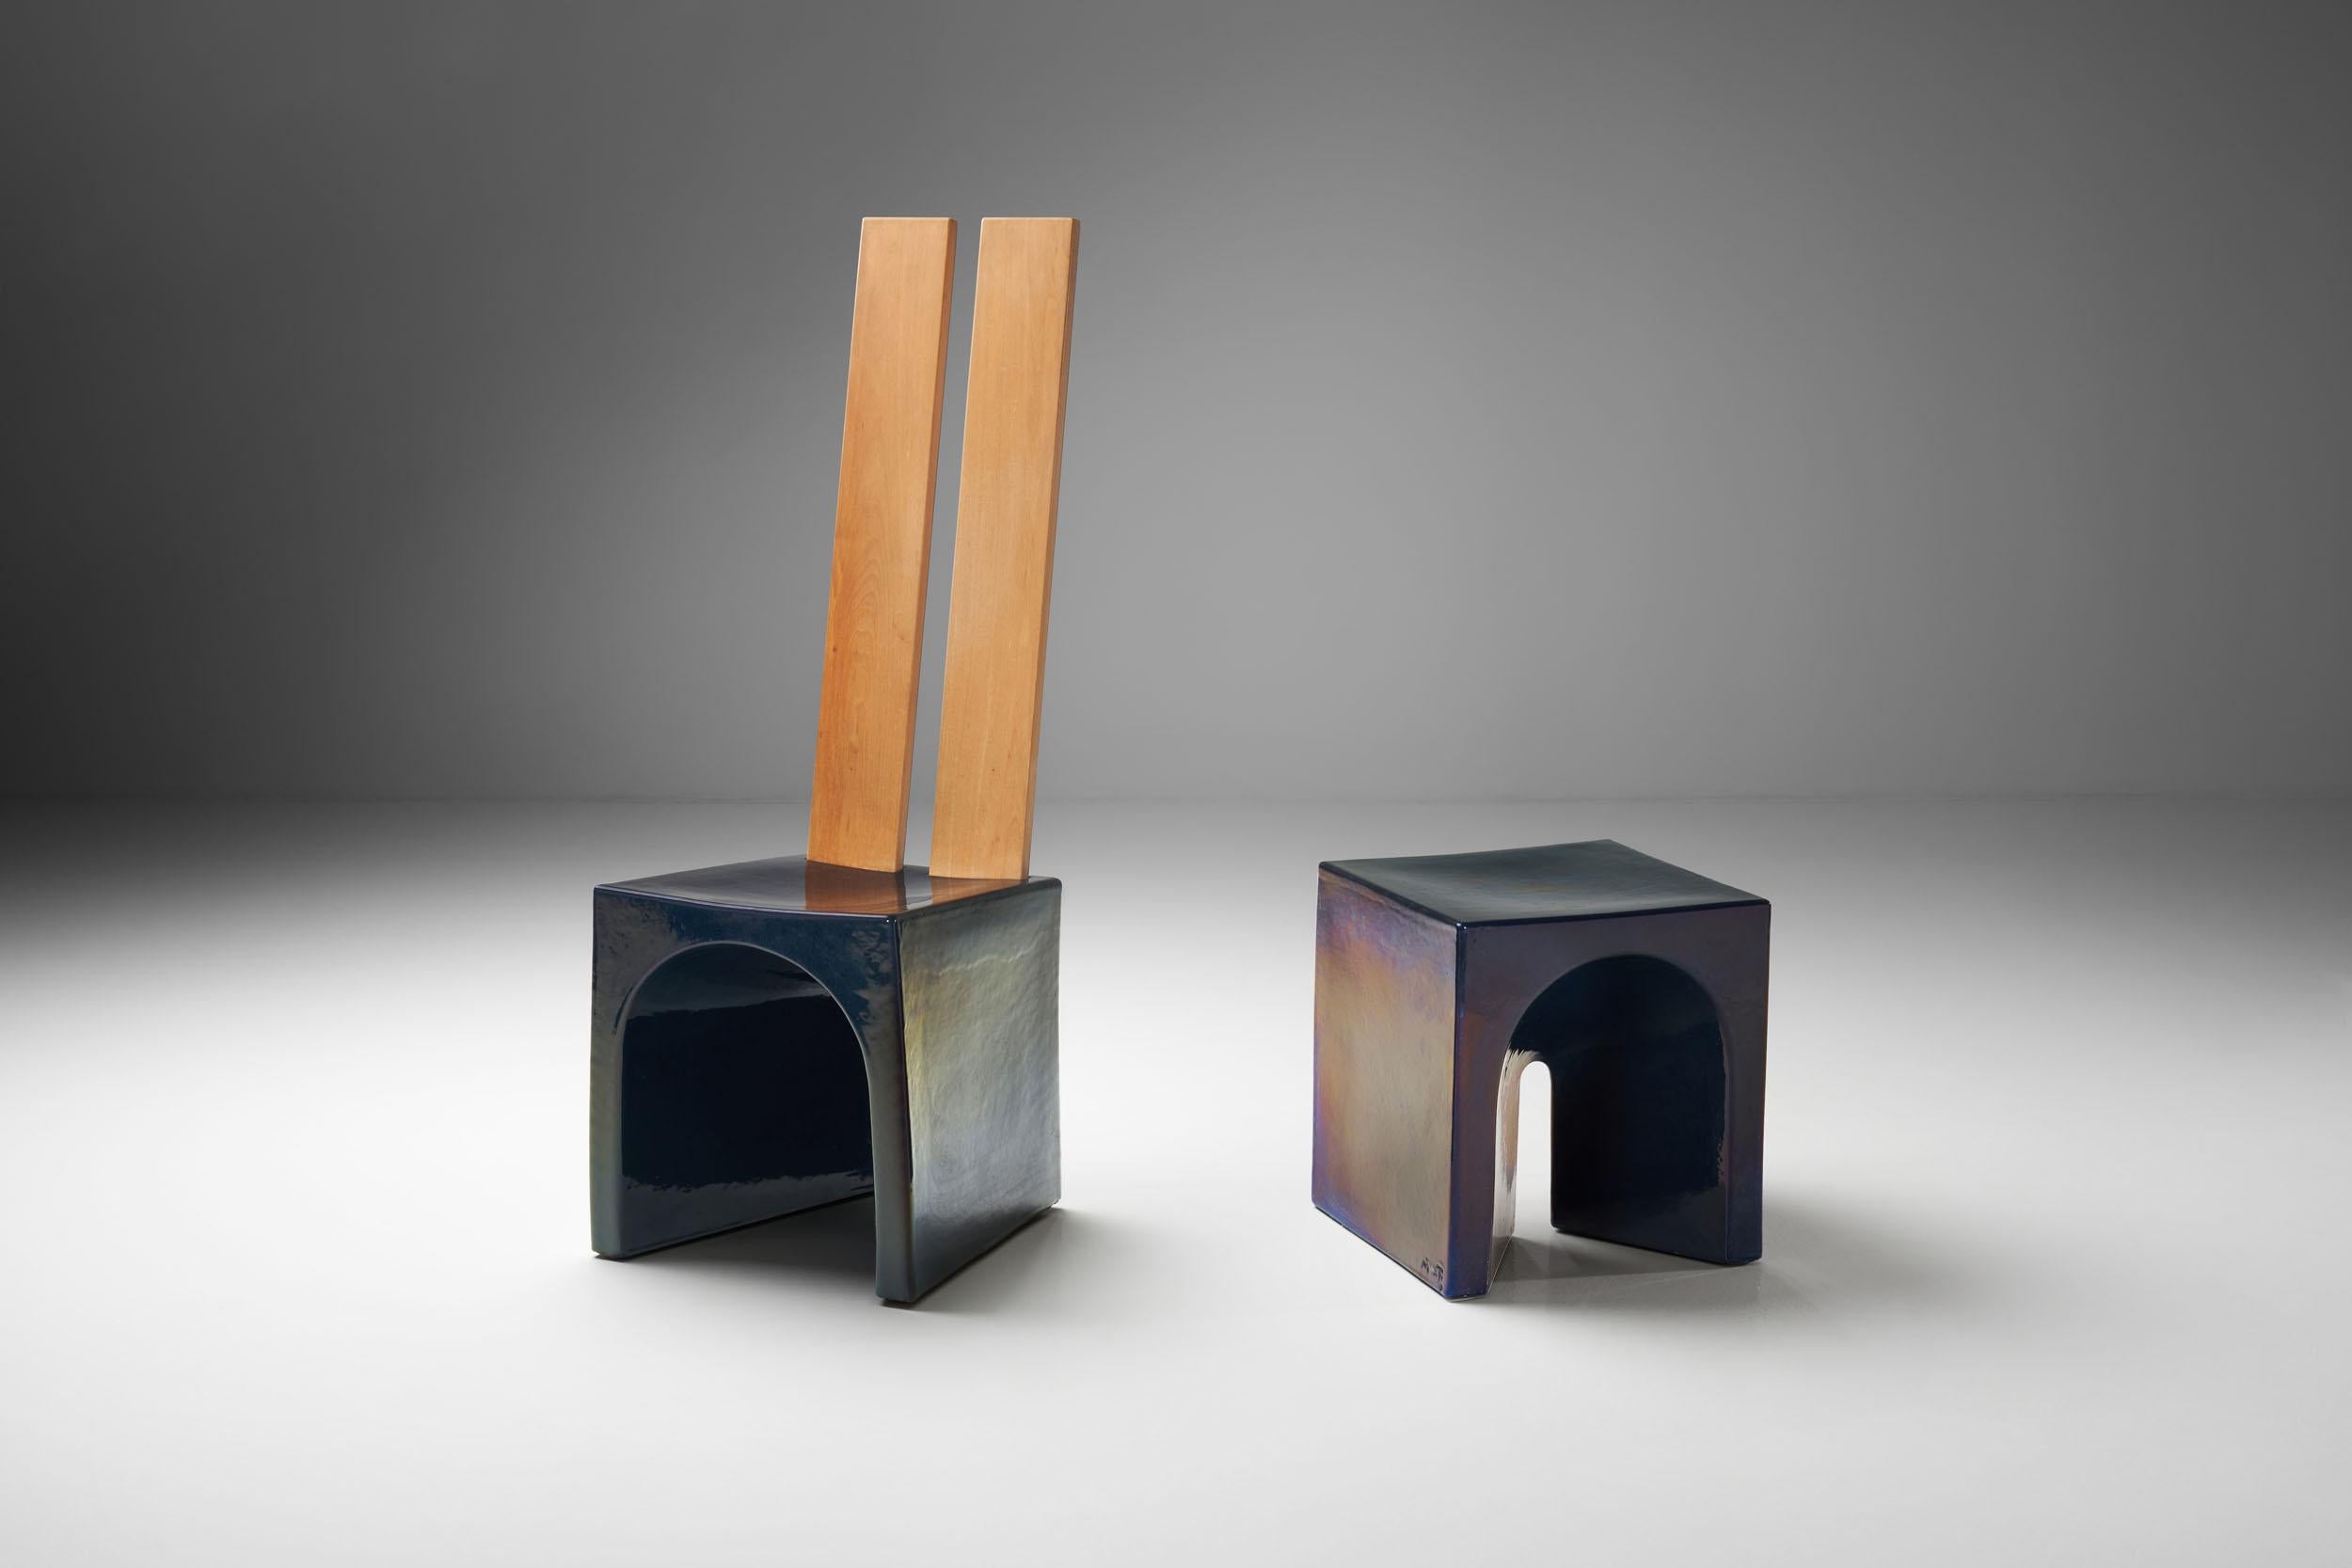 This elemental chair and table are a beautiful example of the collaboration between Dutch designer Tom Bruinsma and Mobach ceramics. These fully glazed ceramic pieces appear in a variety of colors depending on the angle and light. The wooden backs